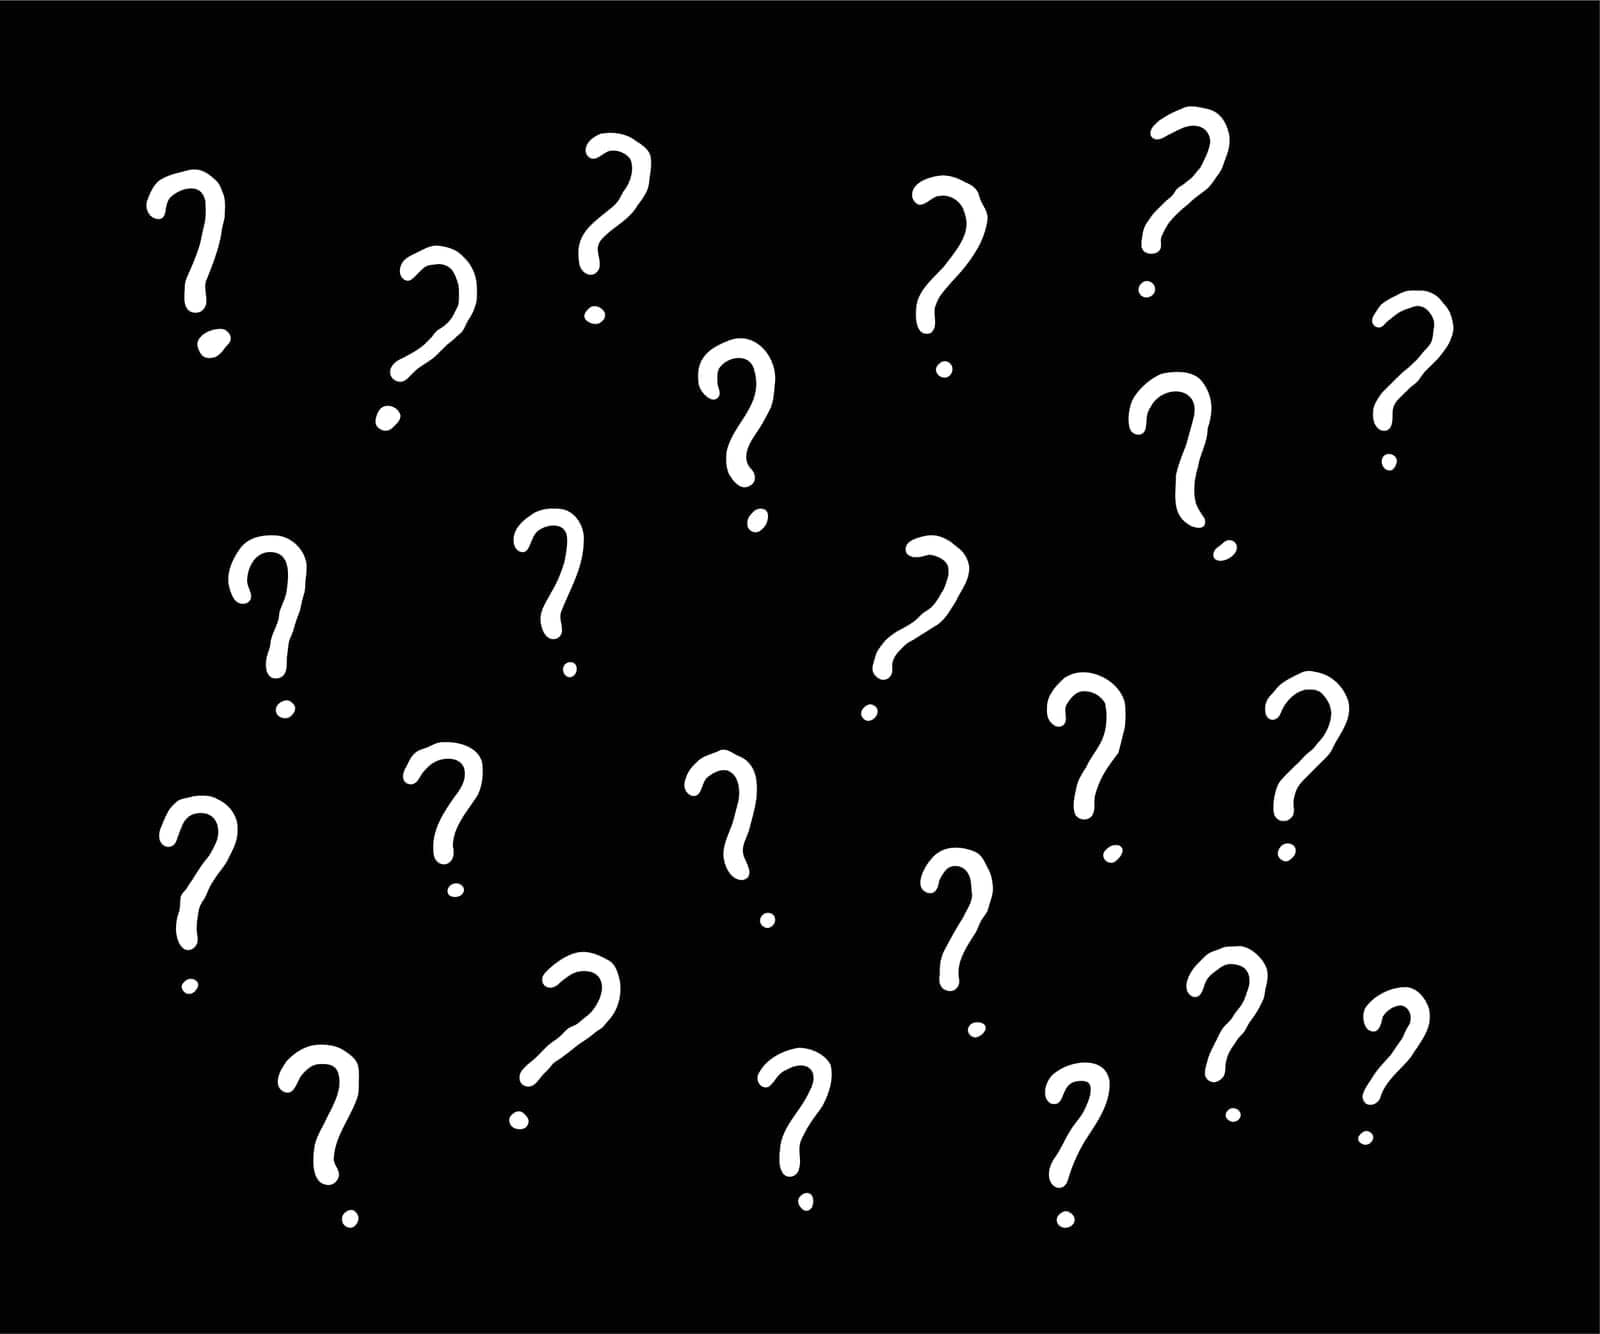 Hand-Drawn White Question Marks Vector Set On Black Background